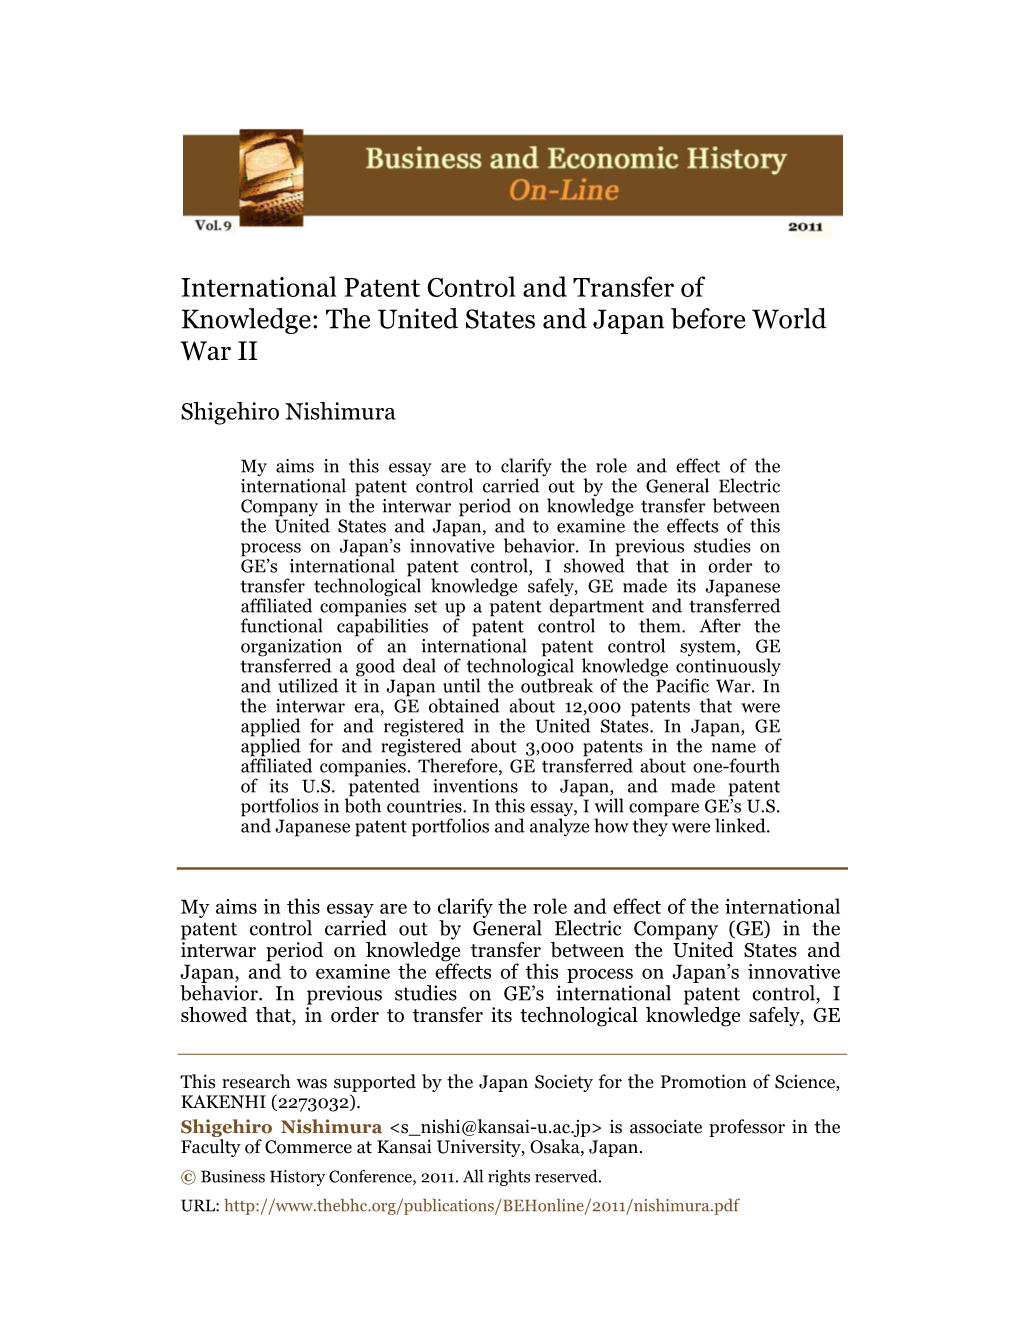 International Patent Control and Transfer of Knowledge: the United States and Japan Before World War II